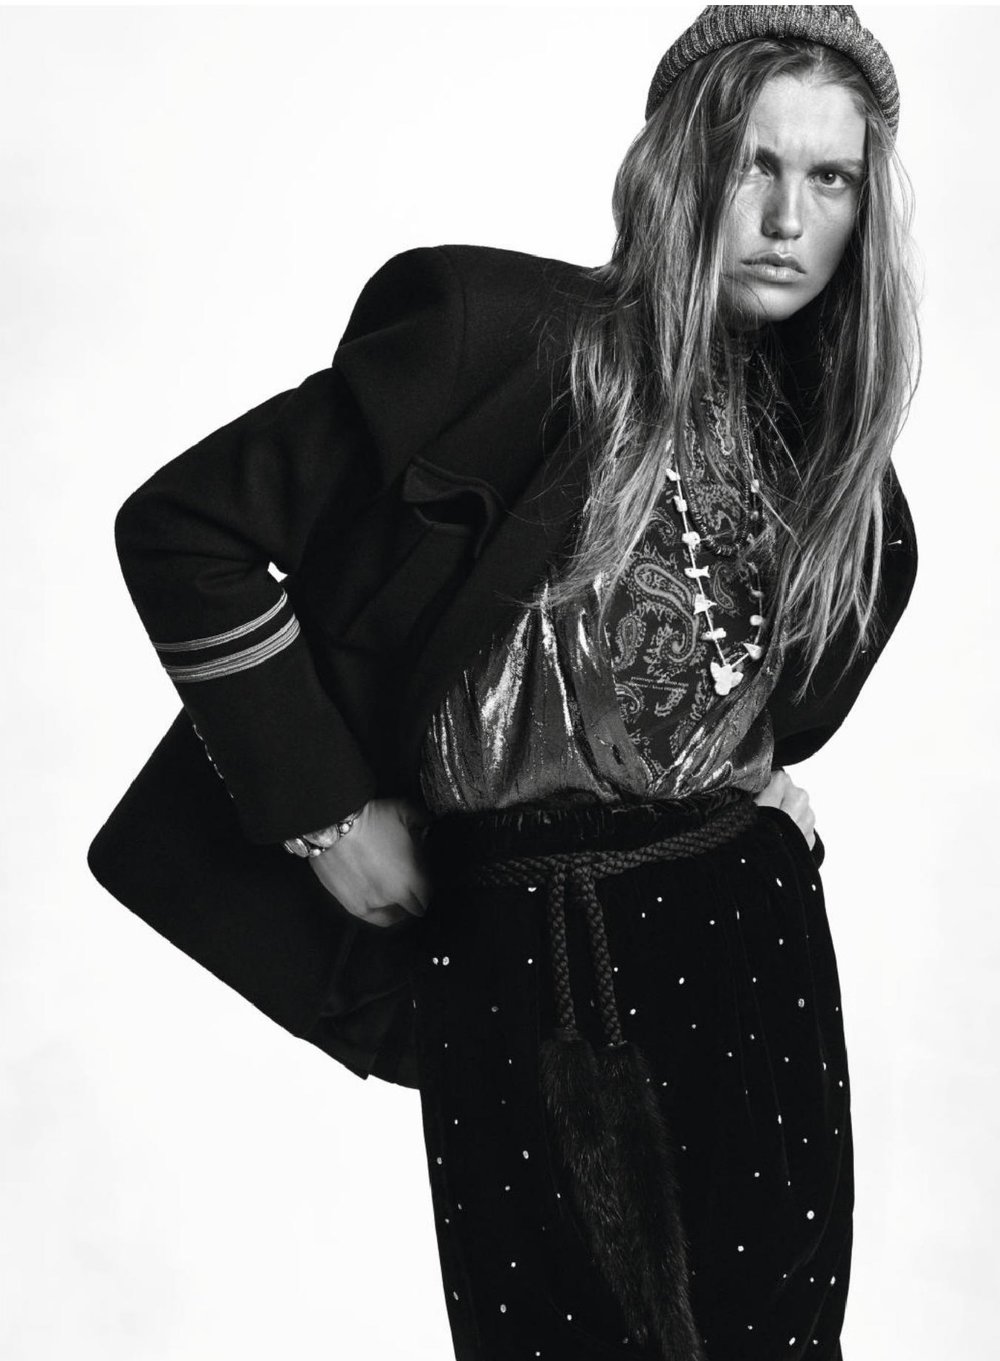 Luna Bijl Poses as Uptown 'Gypsy Girl' Lensed by Christian MacDonald ...